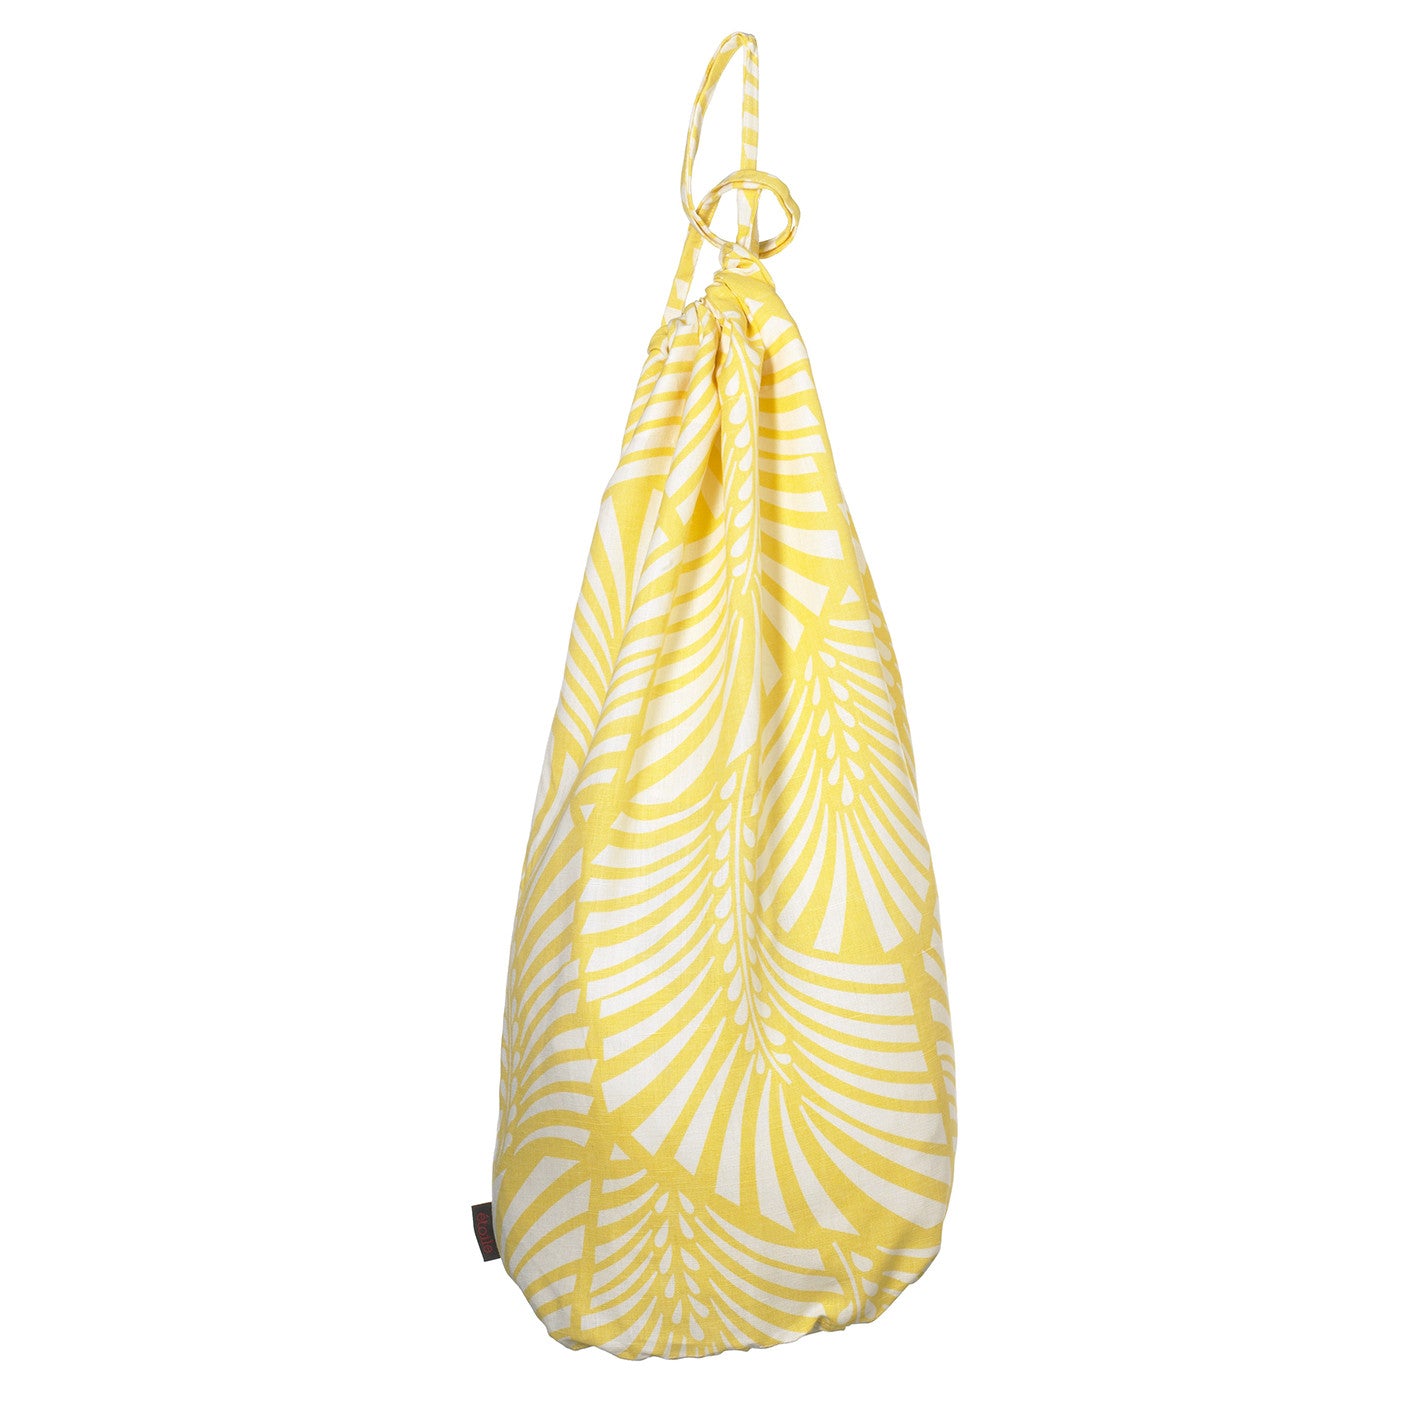 Oscar Palm Leaf Pattern Printed Linen Cotton Laundry & Storage Bags in  Lemon Yellow Ships from Canada (USA)